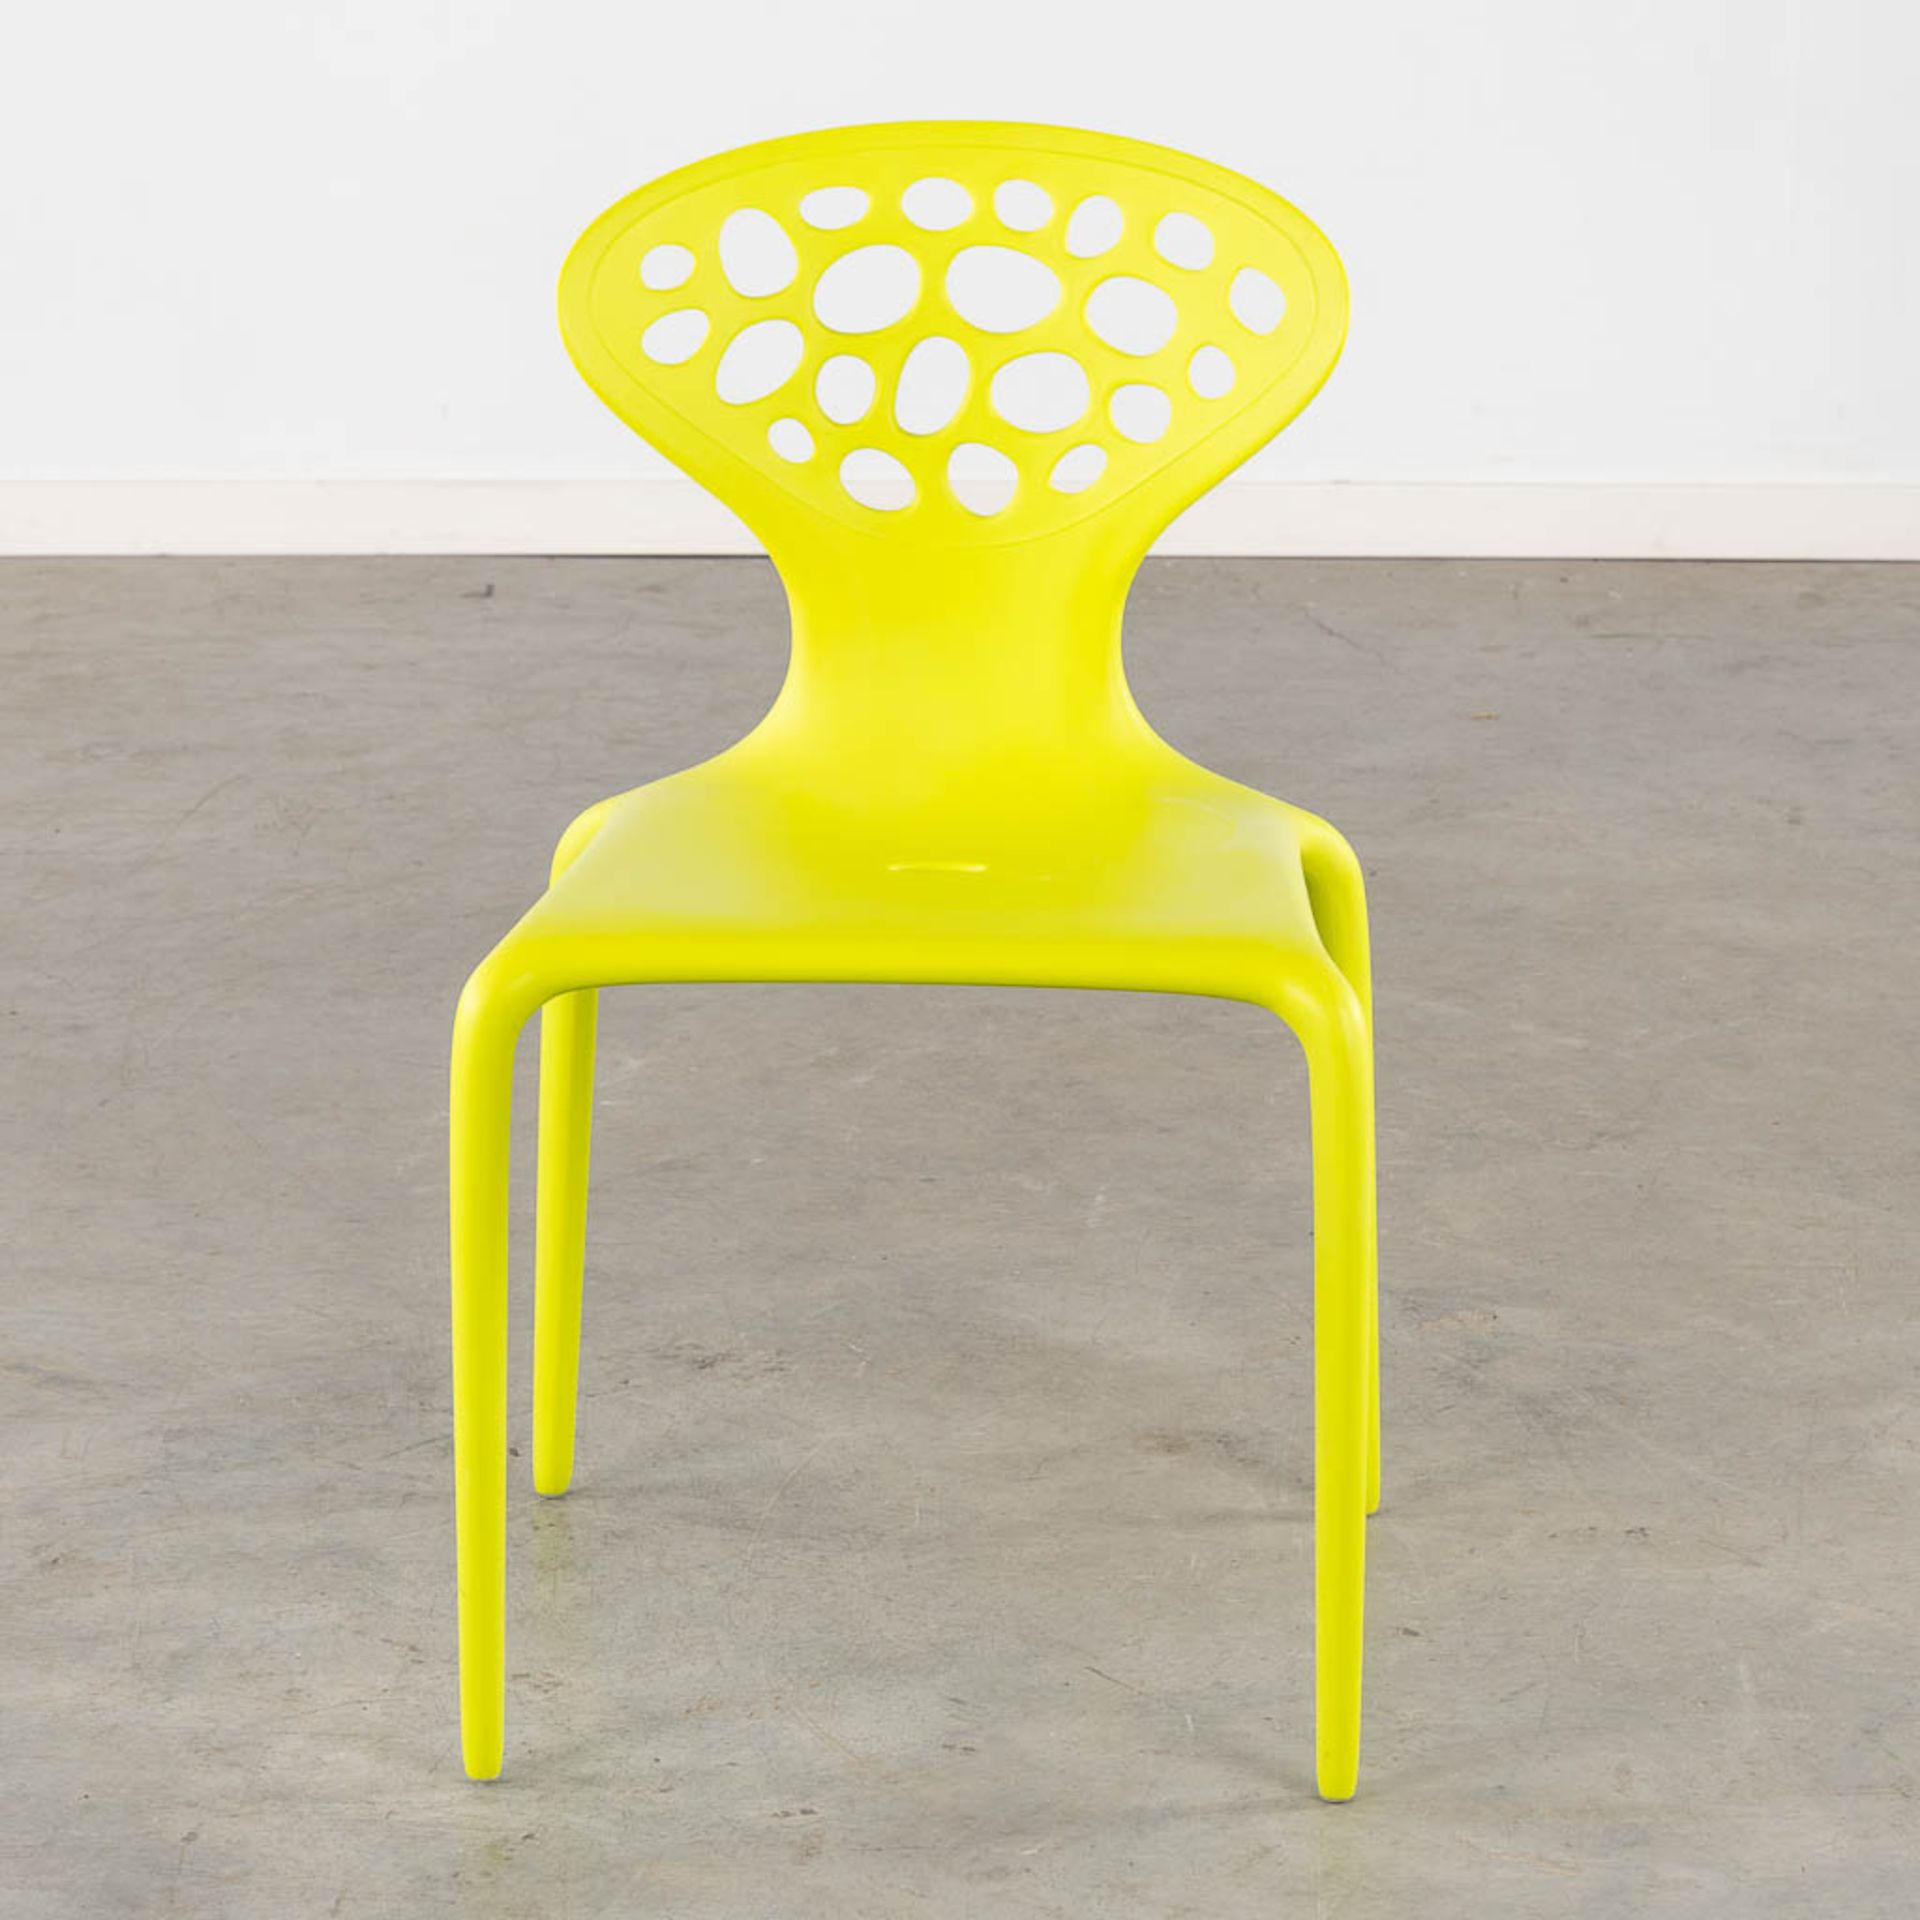 Ross LOVEGROVE (1958) 'Supernatural Chairs' (2005) for Morosso, Italy. (L:48 x W:48 x H:82 cm) - Image 3 of 11